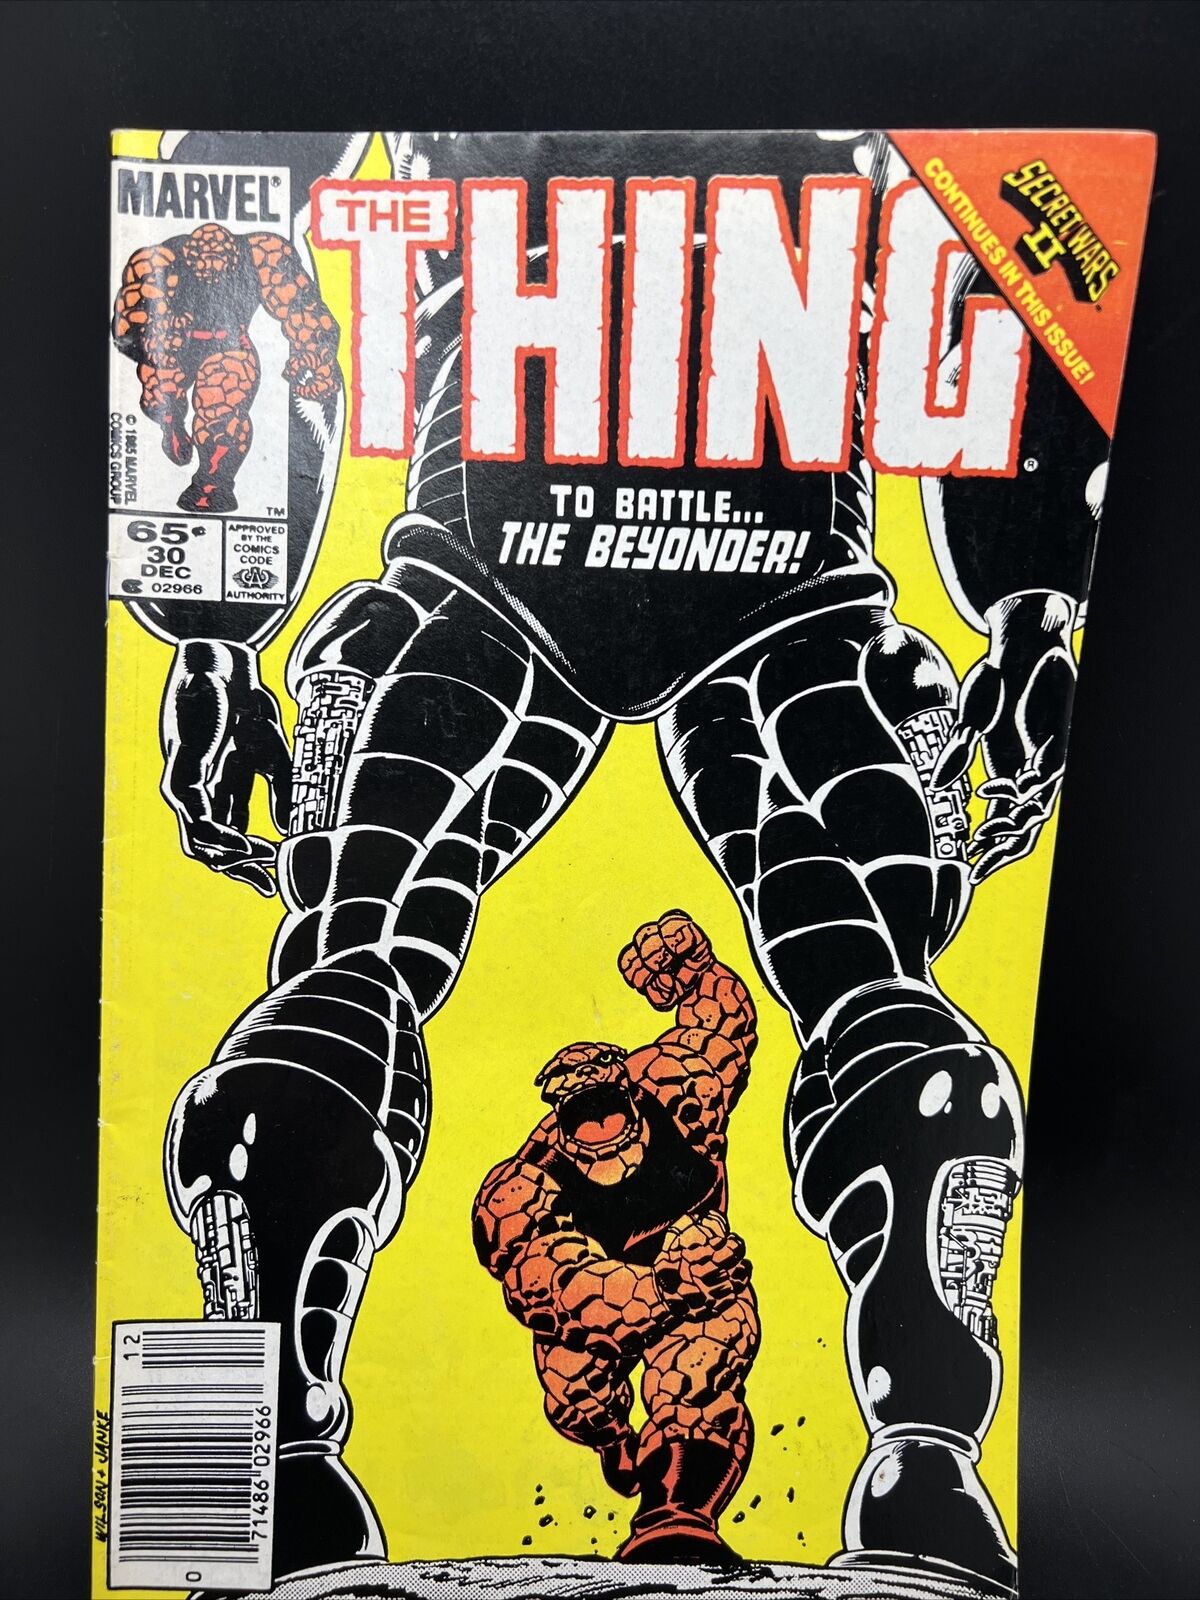 The Thing #30 To Battle The Beyonder Marvel Comics Dec 1985 Wilson Janke